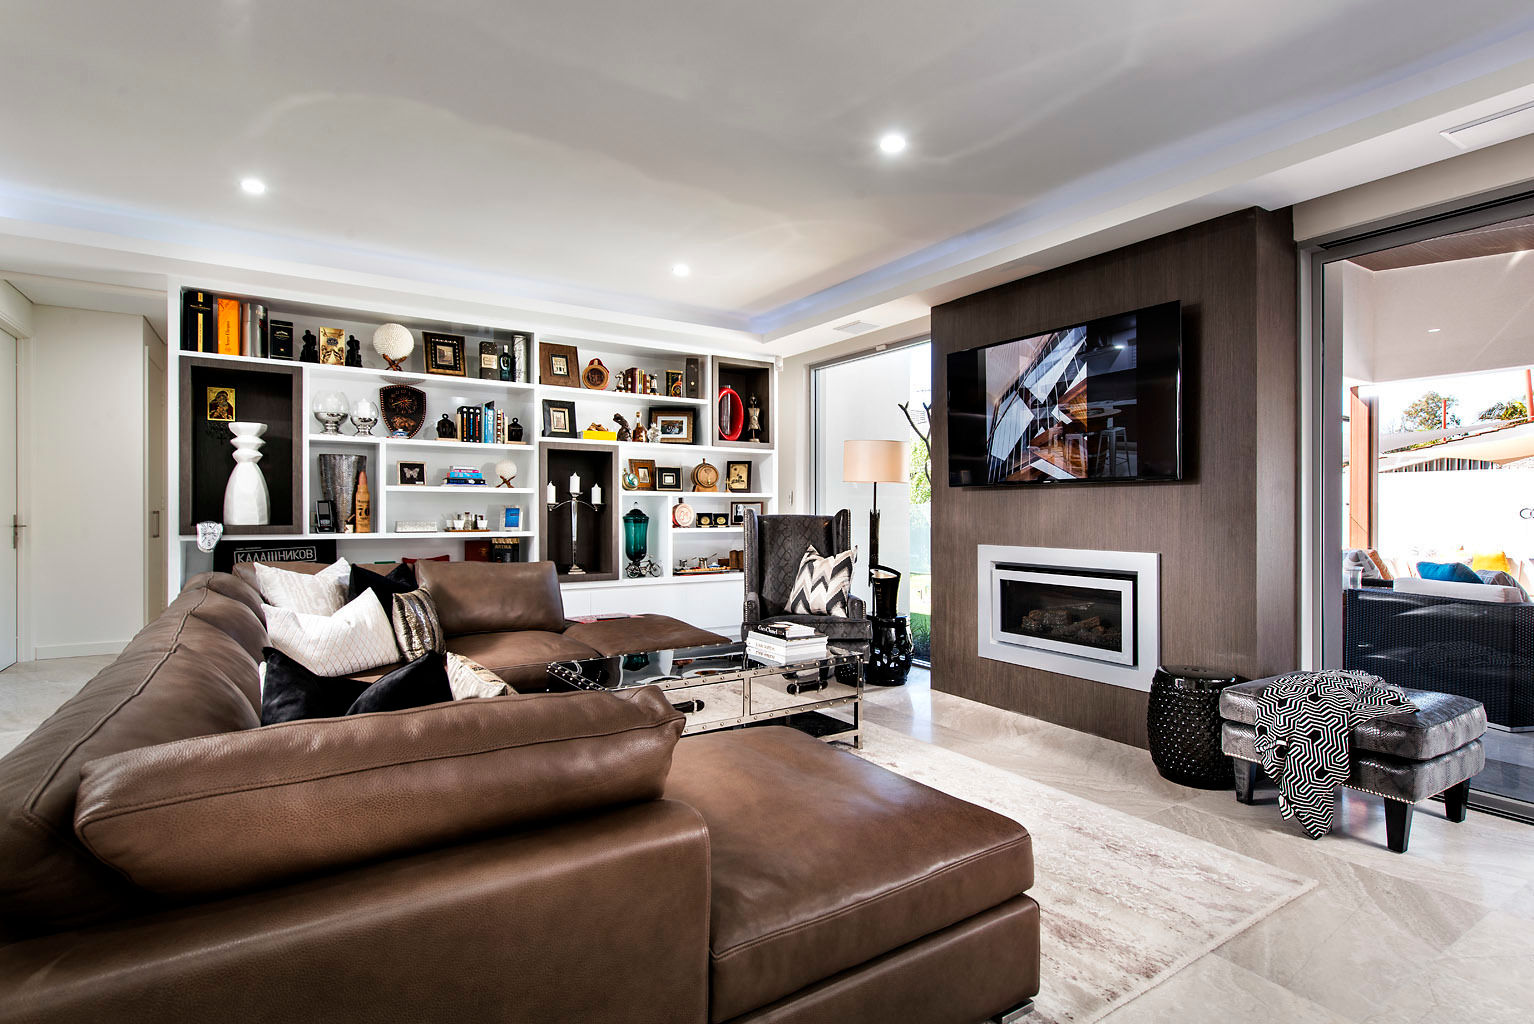 Living Rooms by Moda Interiors, Perth, Western Australia Moda Interiors Living room